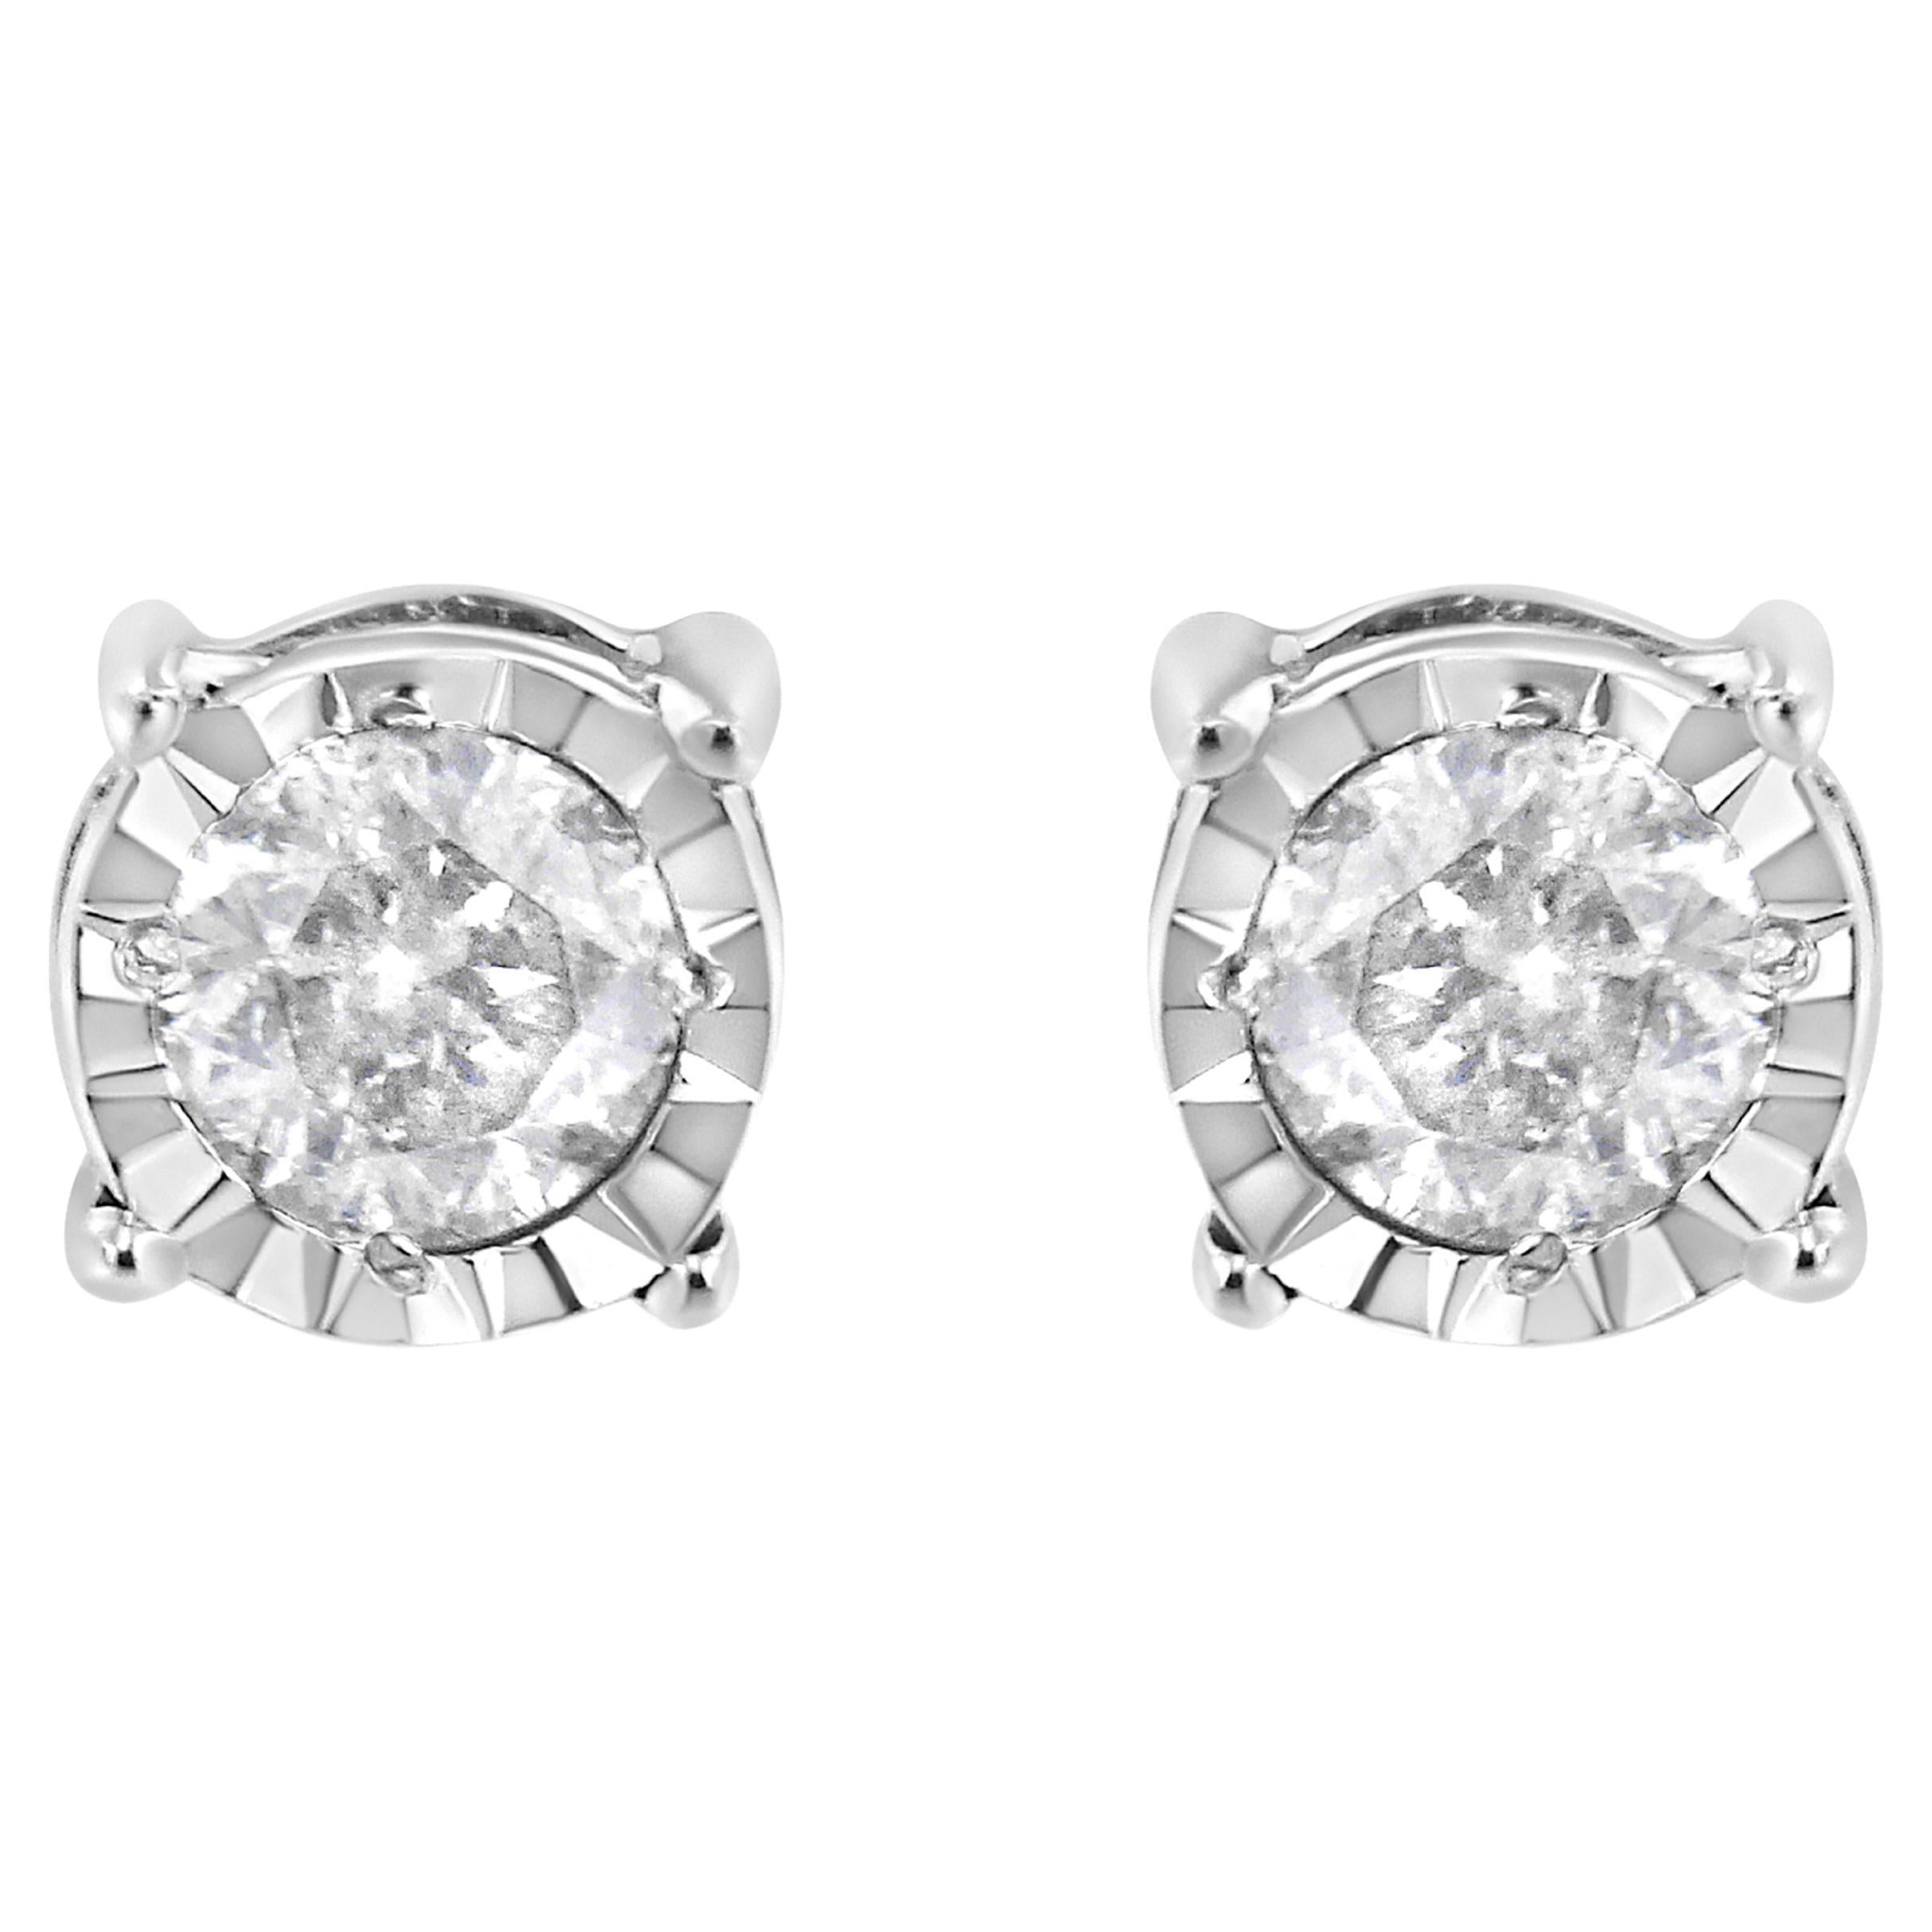 .925 Sterling Silver 3/8 Carat Brilliant Cut Diamond Solitaire Stud Earrings For Sale